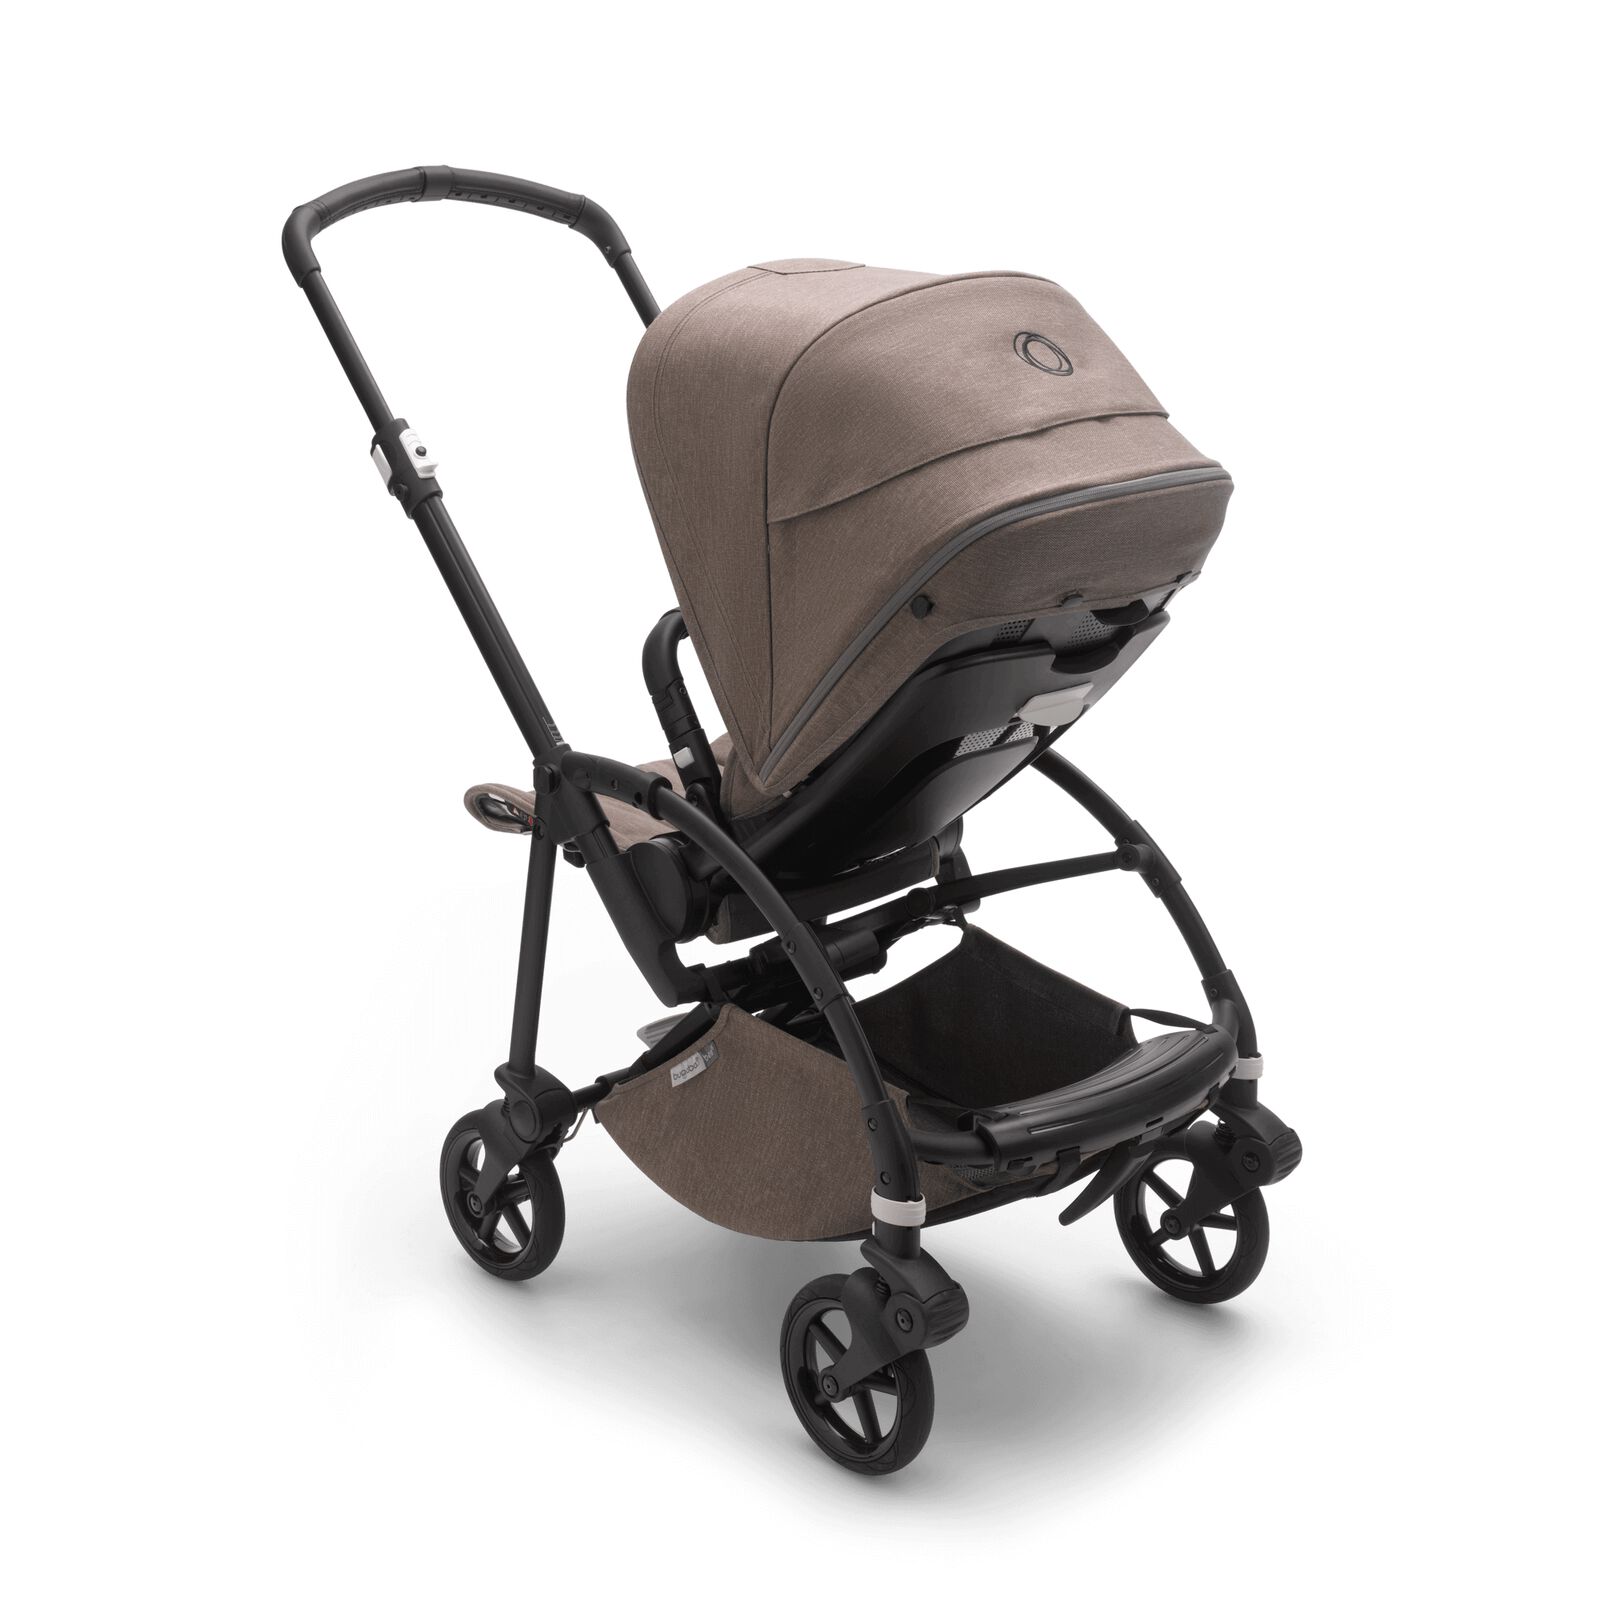 PP Bugaboo Bee6 Mineral complete BLACK/TAUPE-TAUPE